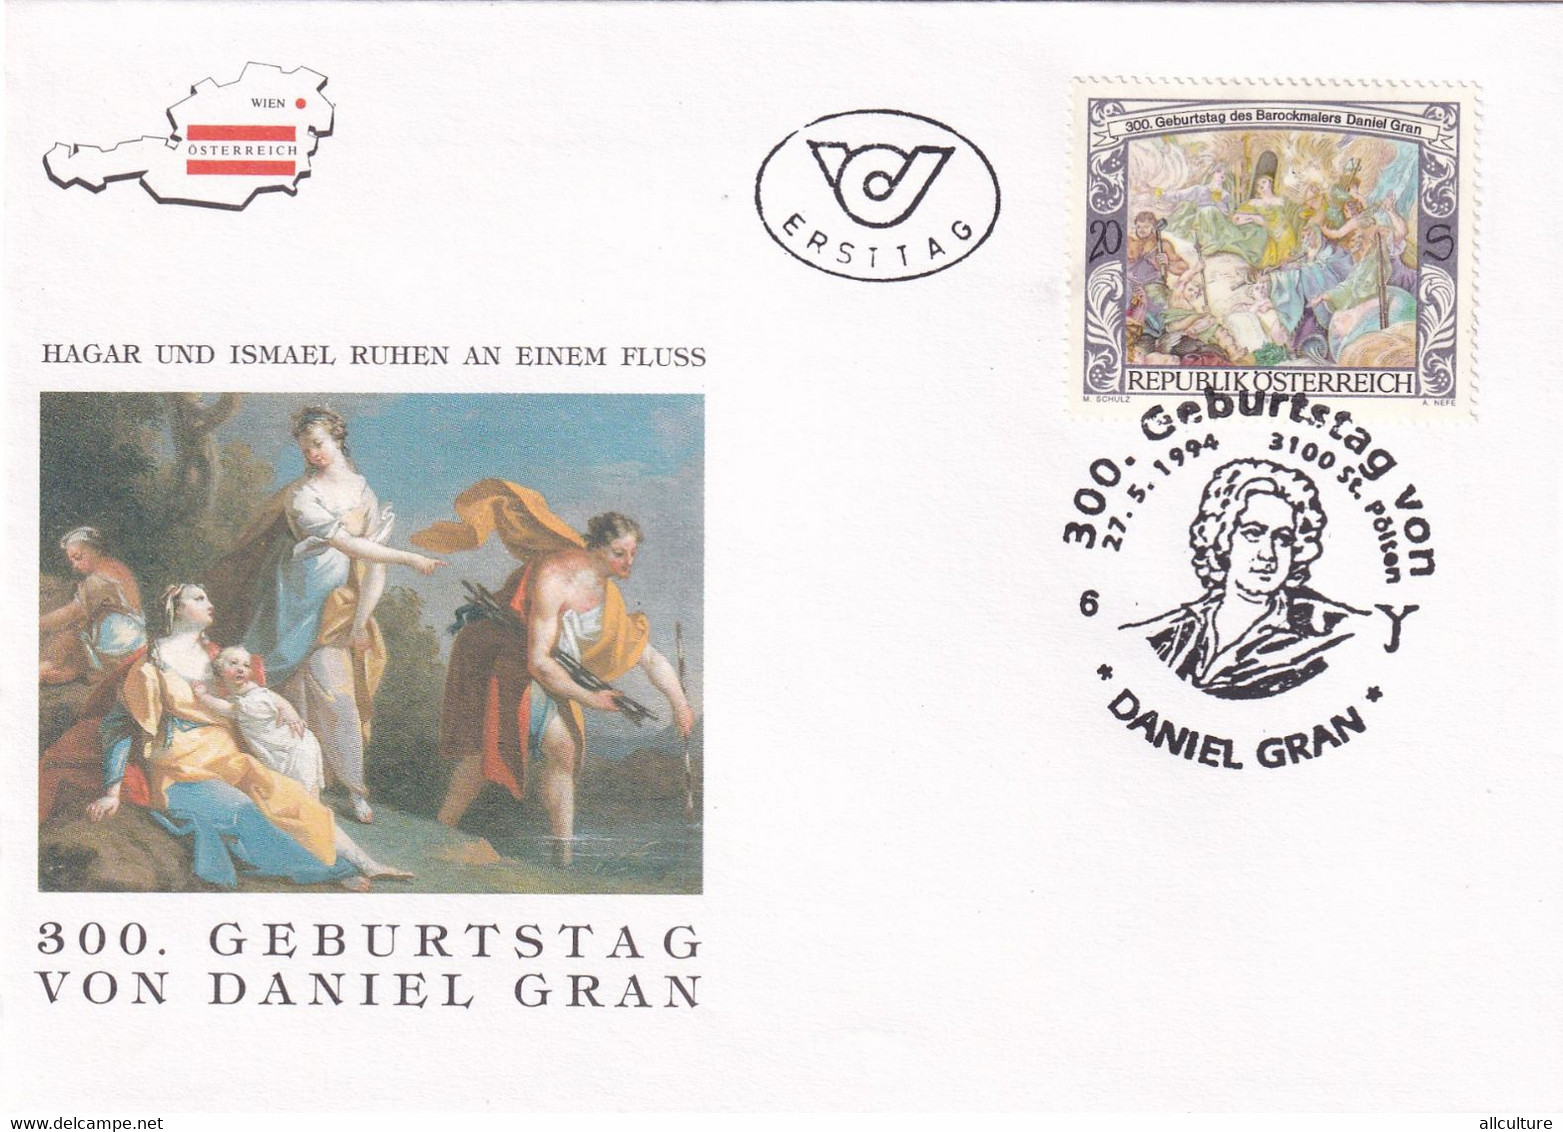 A8393- ERSTTAG DANIEL GRAN PAINTINGS, WEIN 1994 REPUBLIC OSTERREICH AUSTRIA USED STAMP ON COVER - Covers & Documents